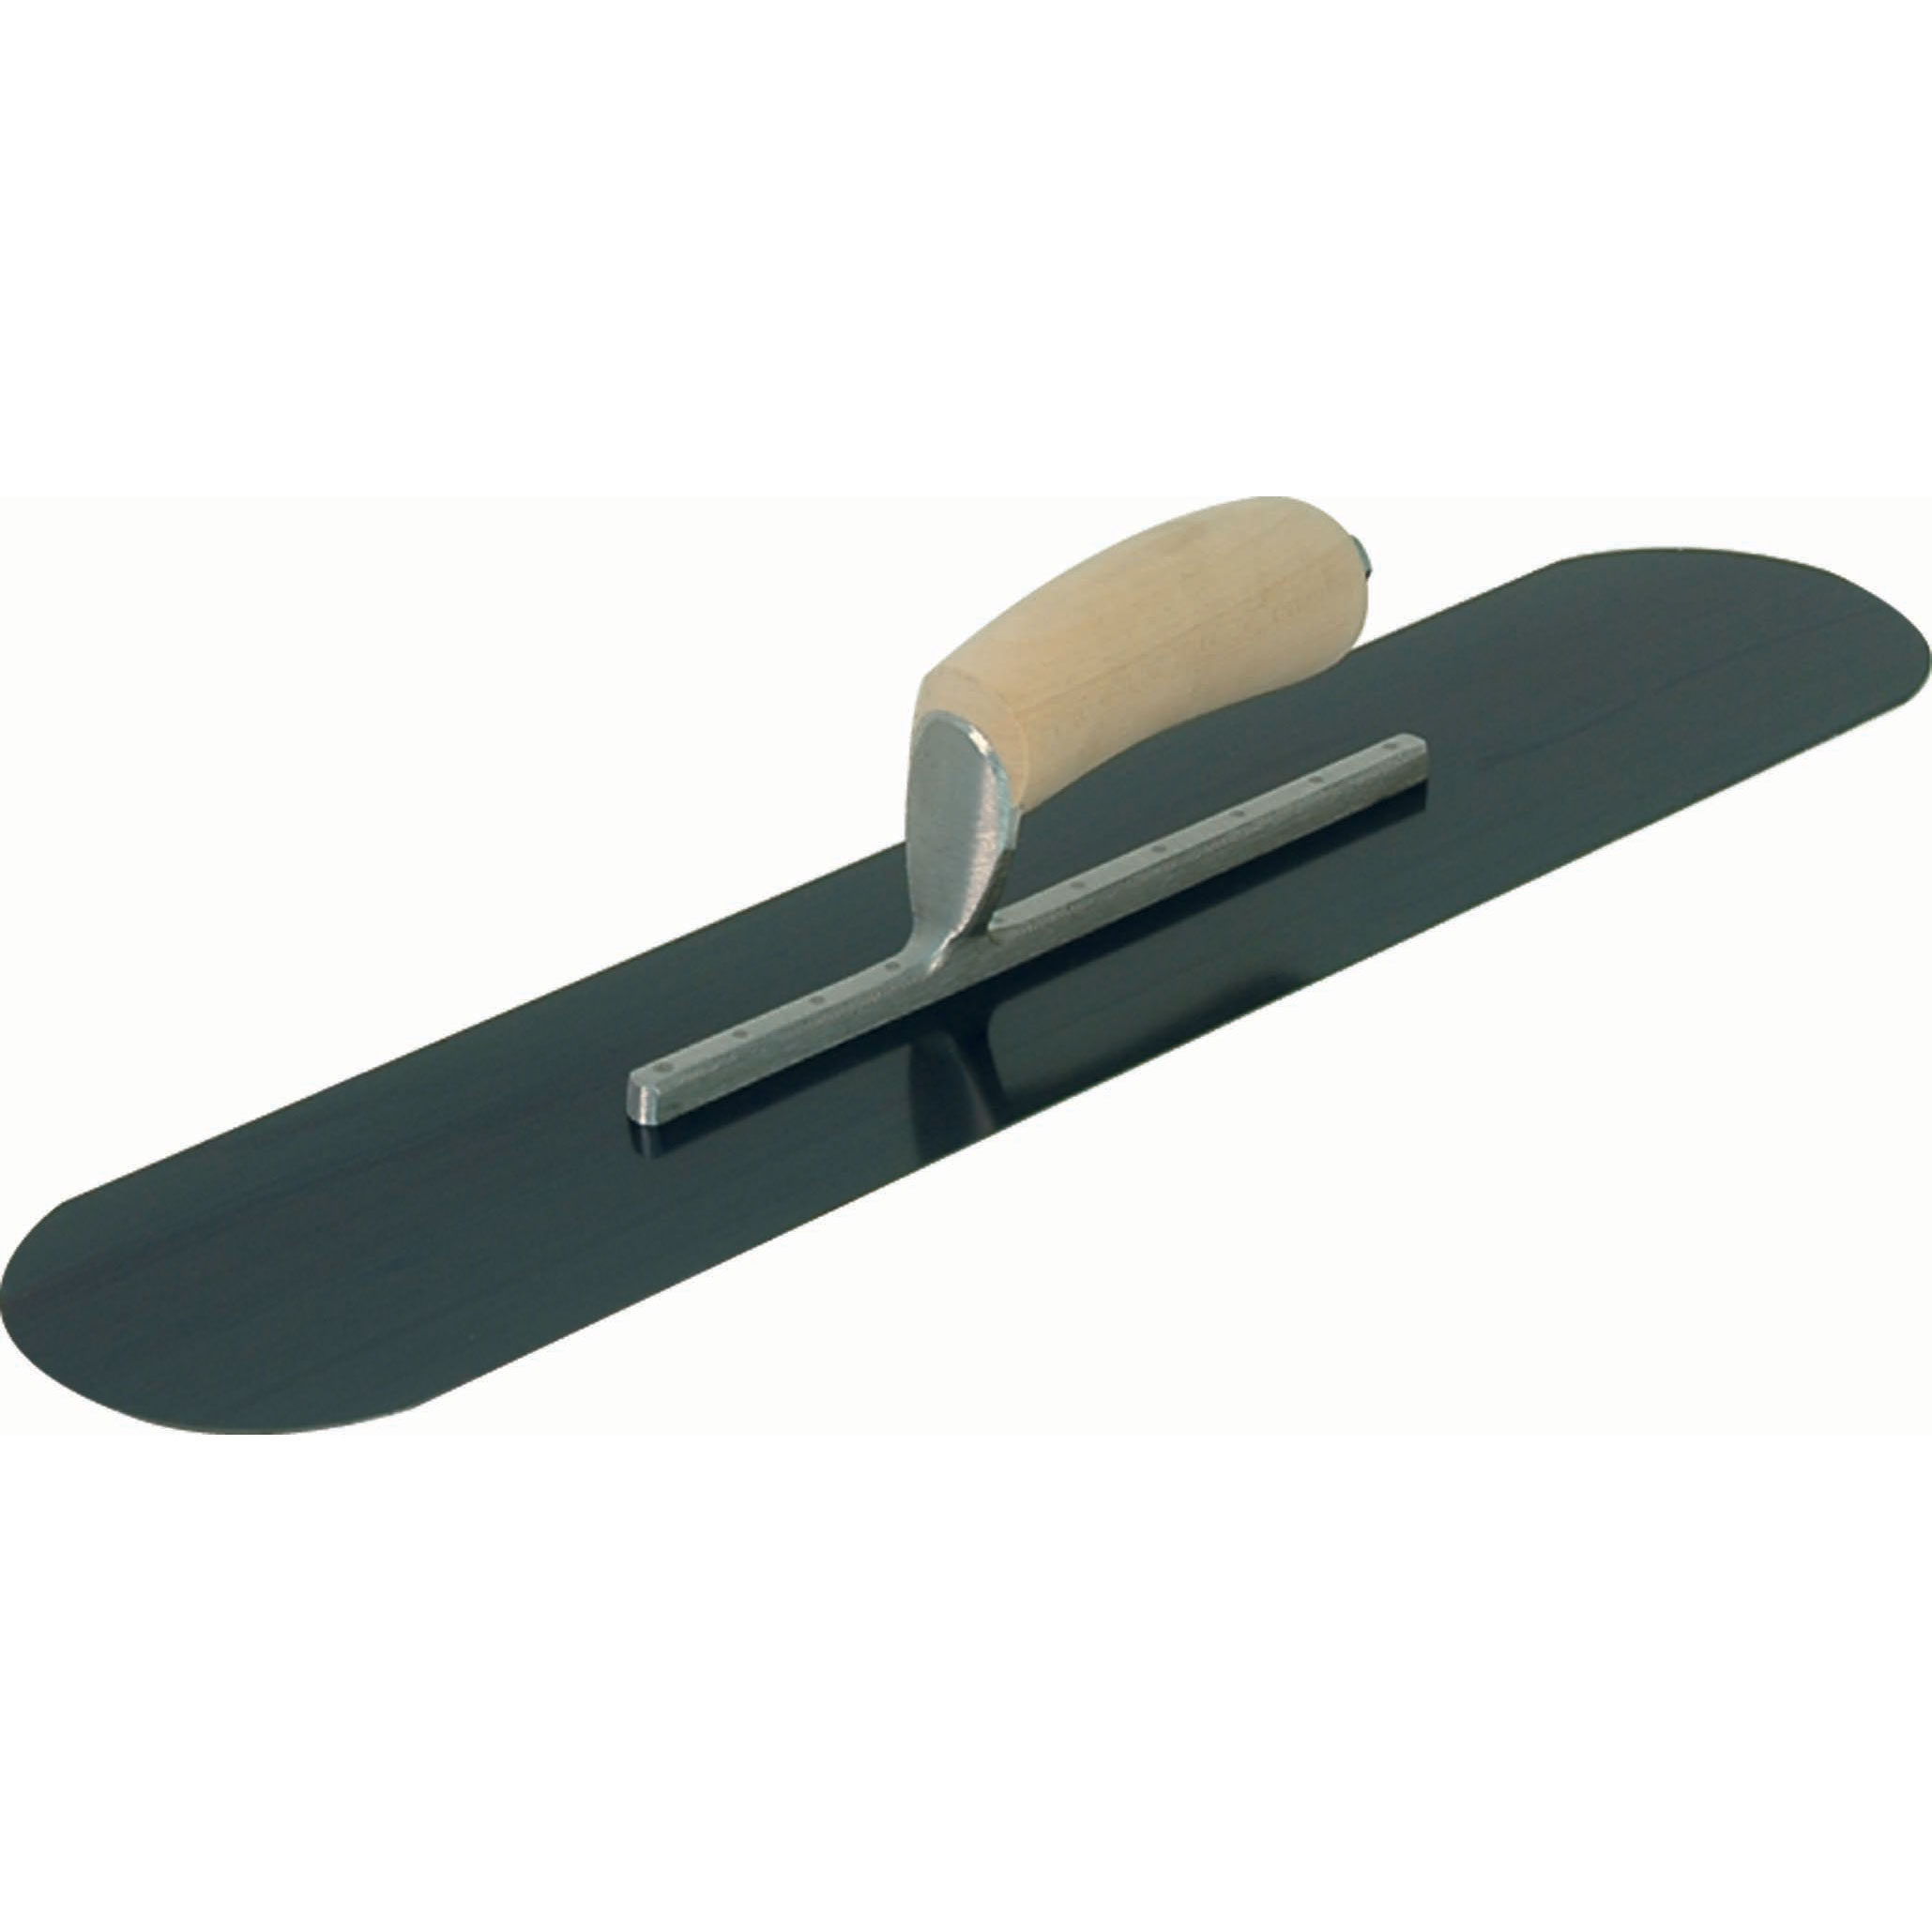 Marshalltown SP2245BR10 22in x 4-1/2in Fully Rounded Trowel with Exposed Rivet Trowels and Wood Handle SP2245BR10